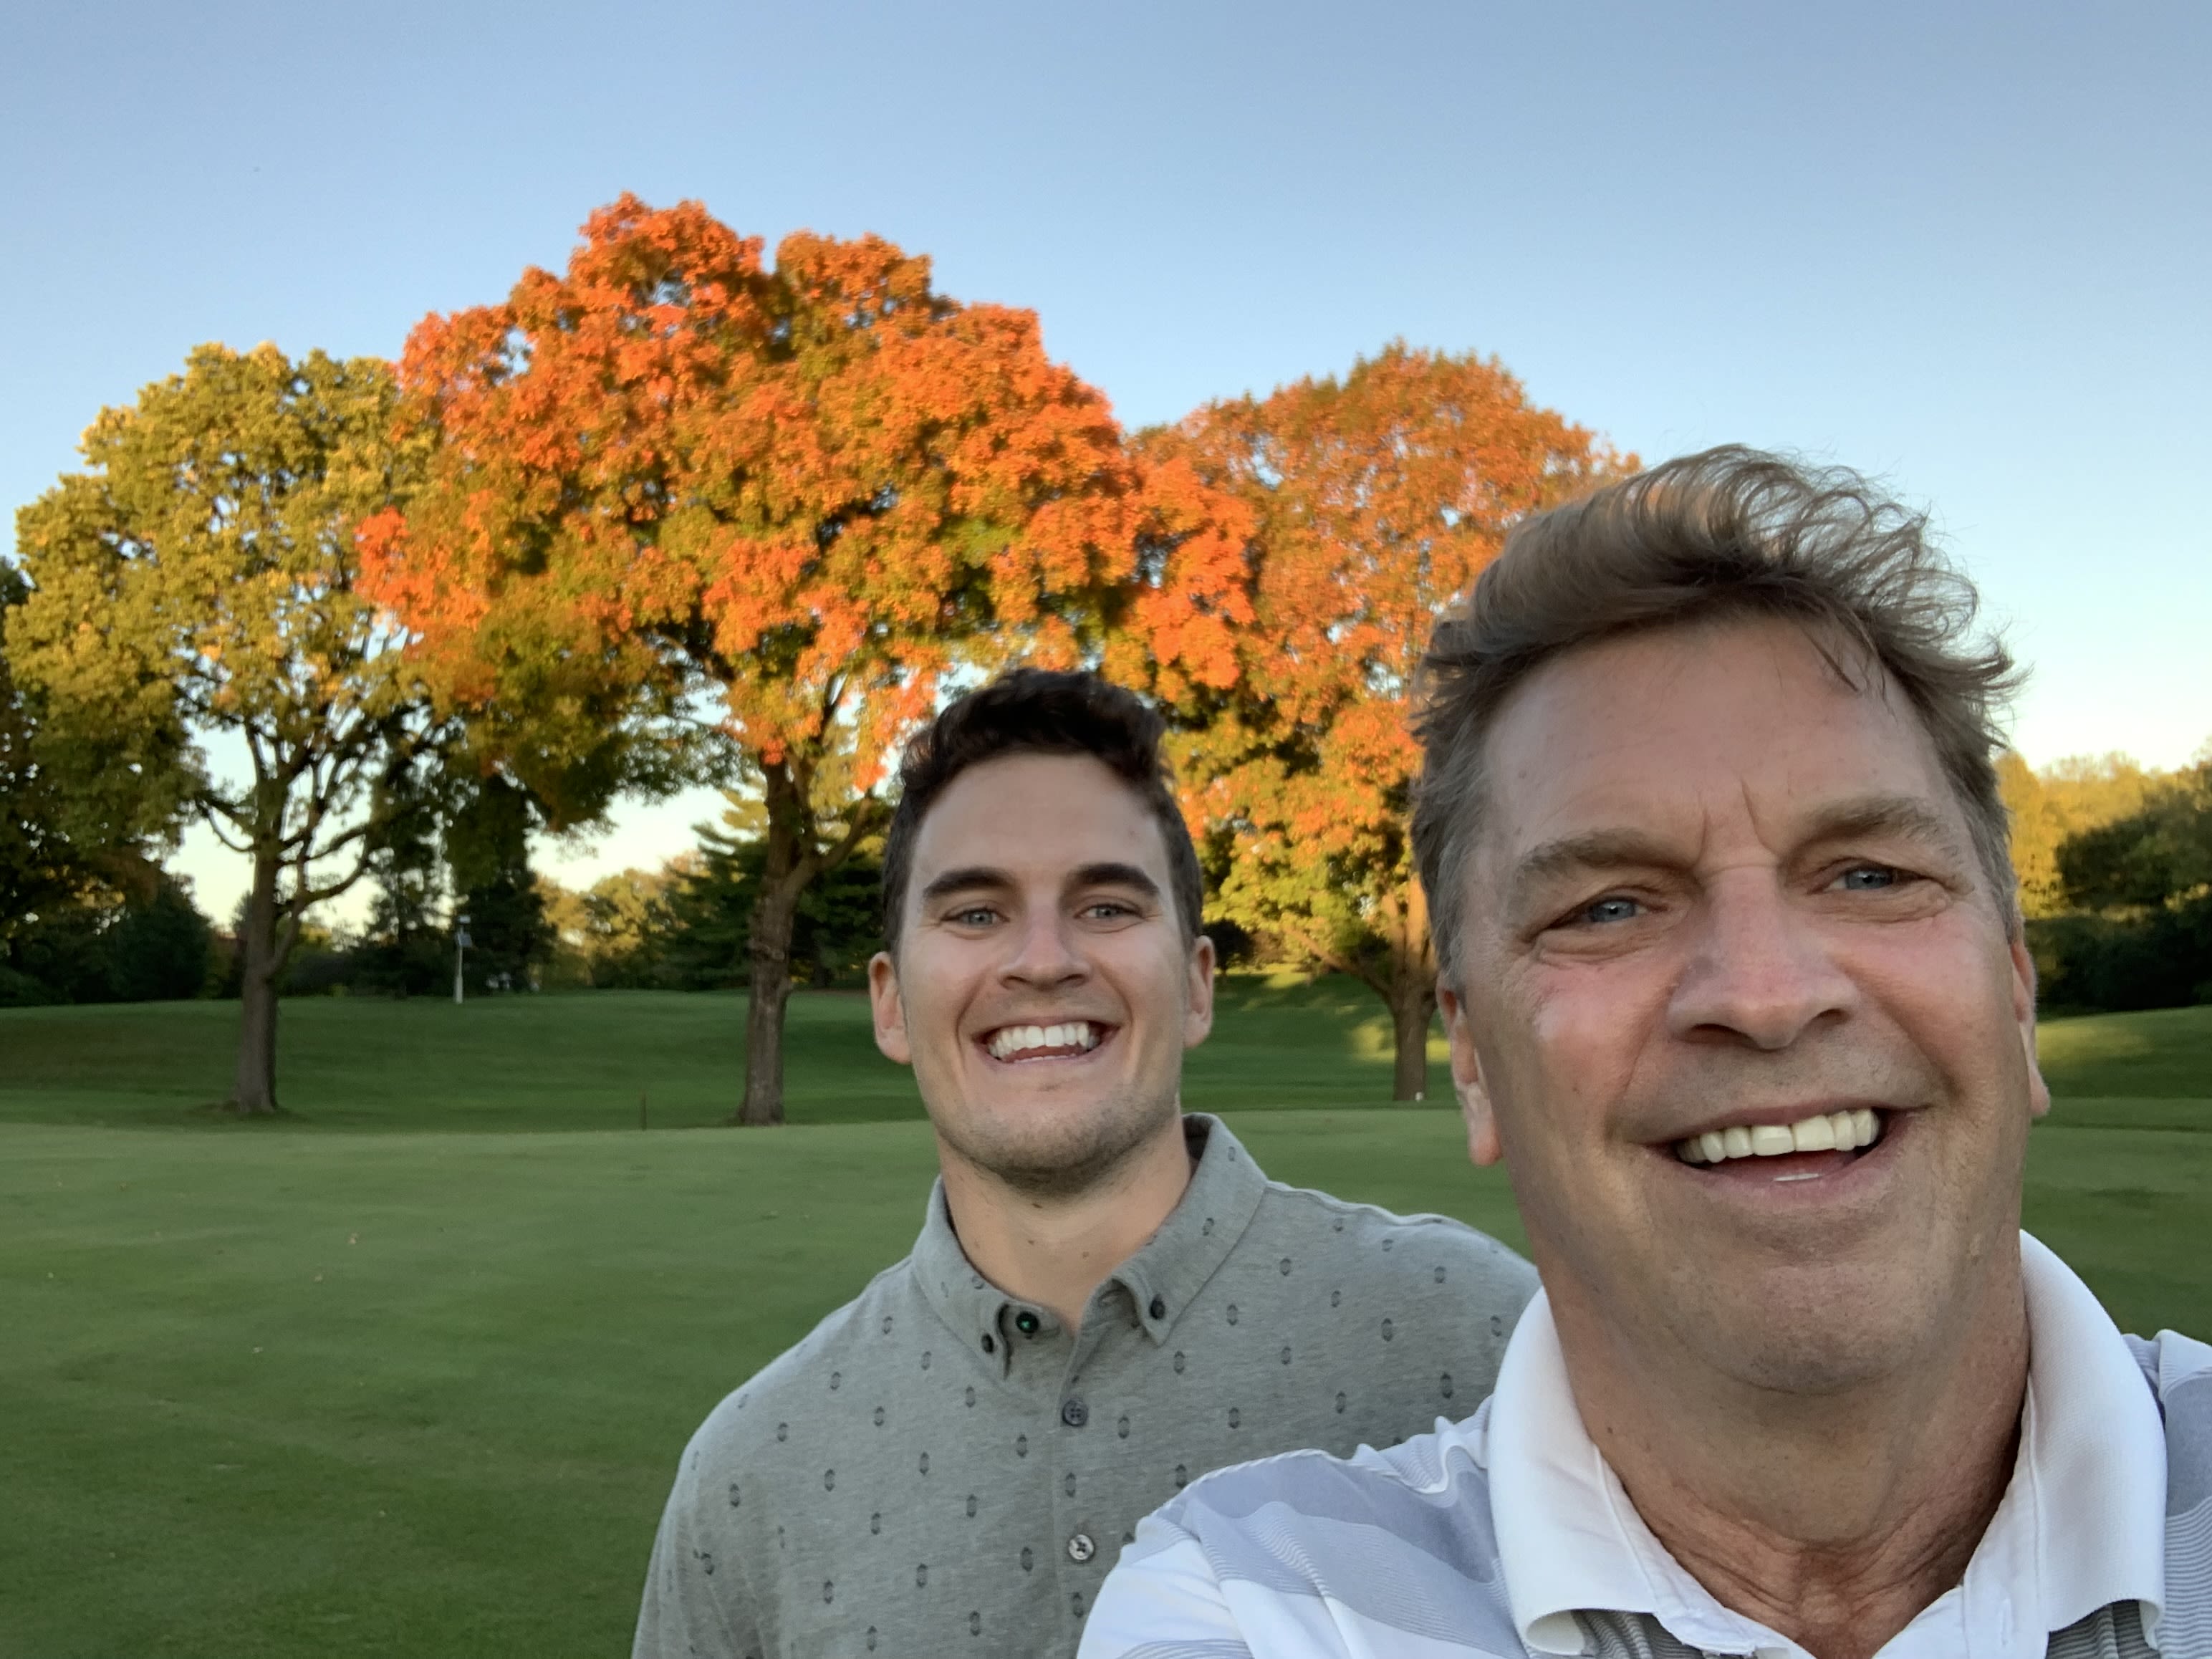 My dad and I playing golf together.